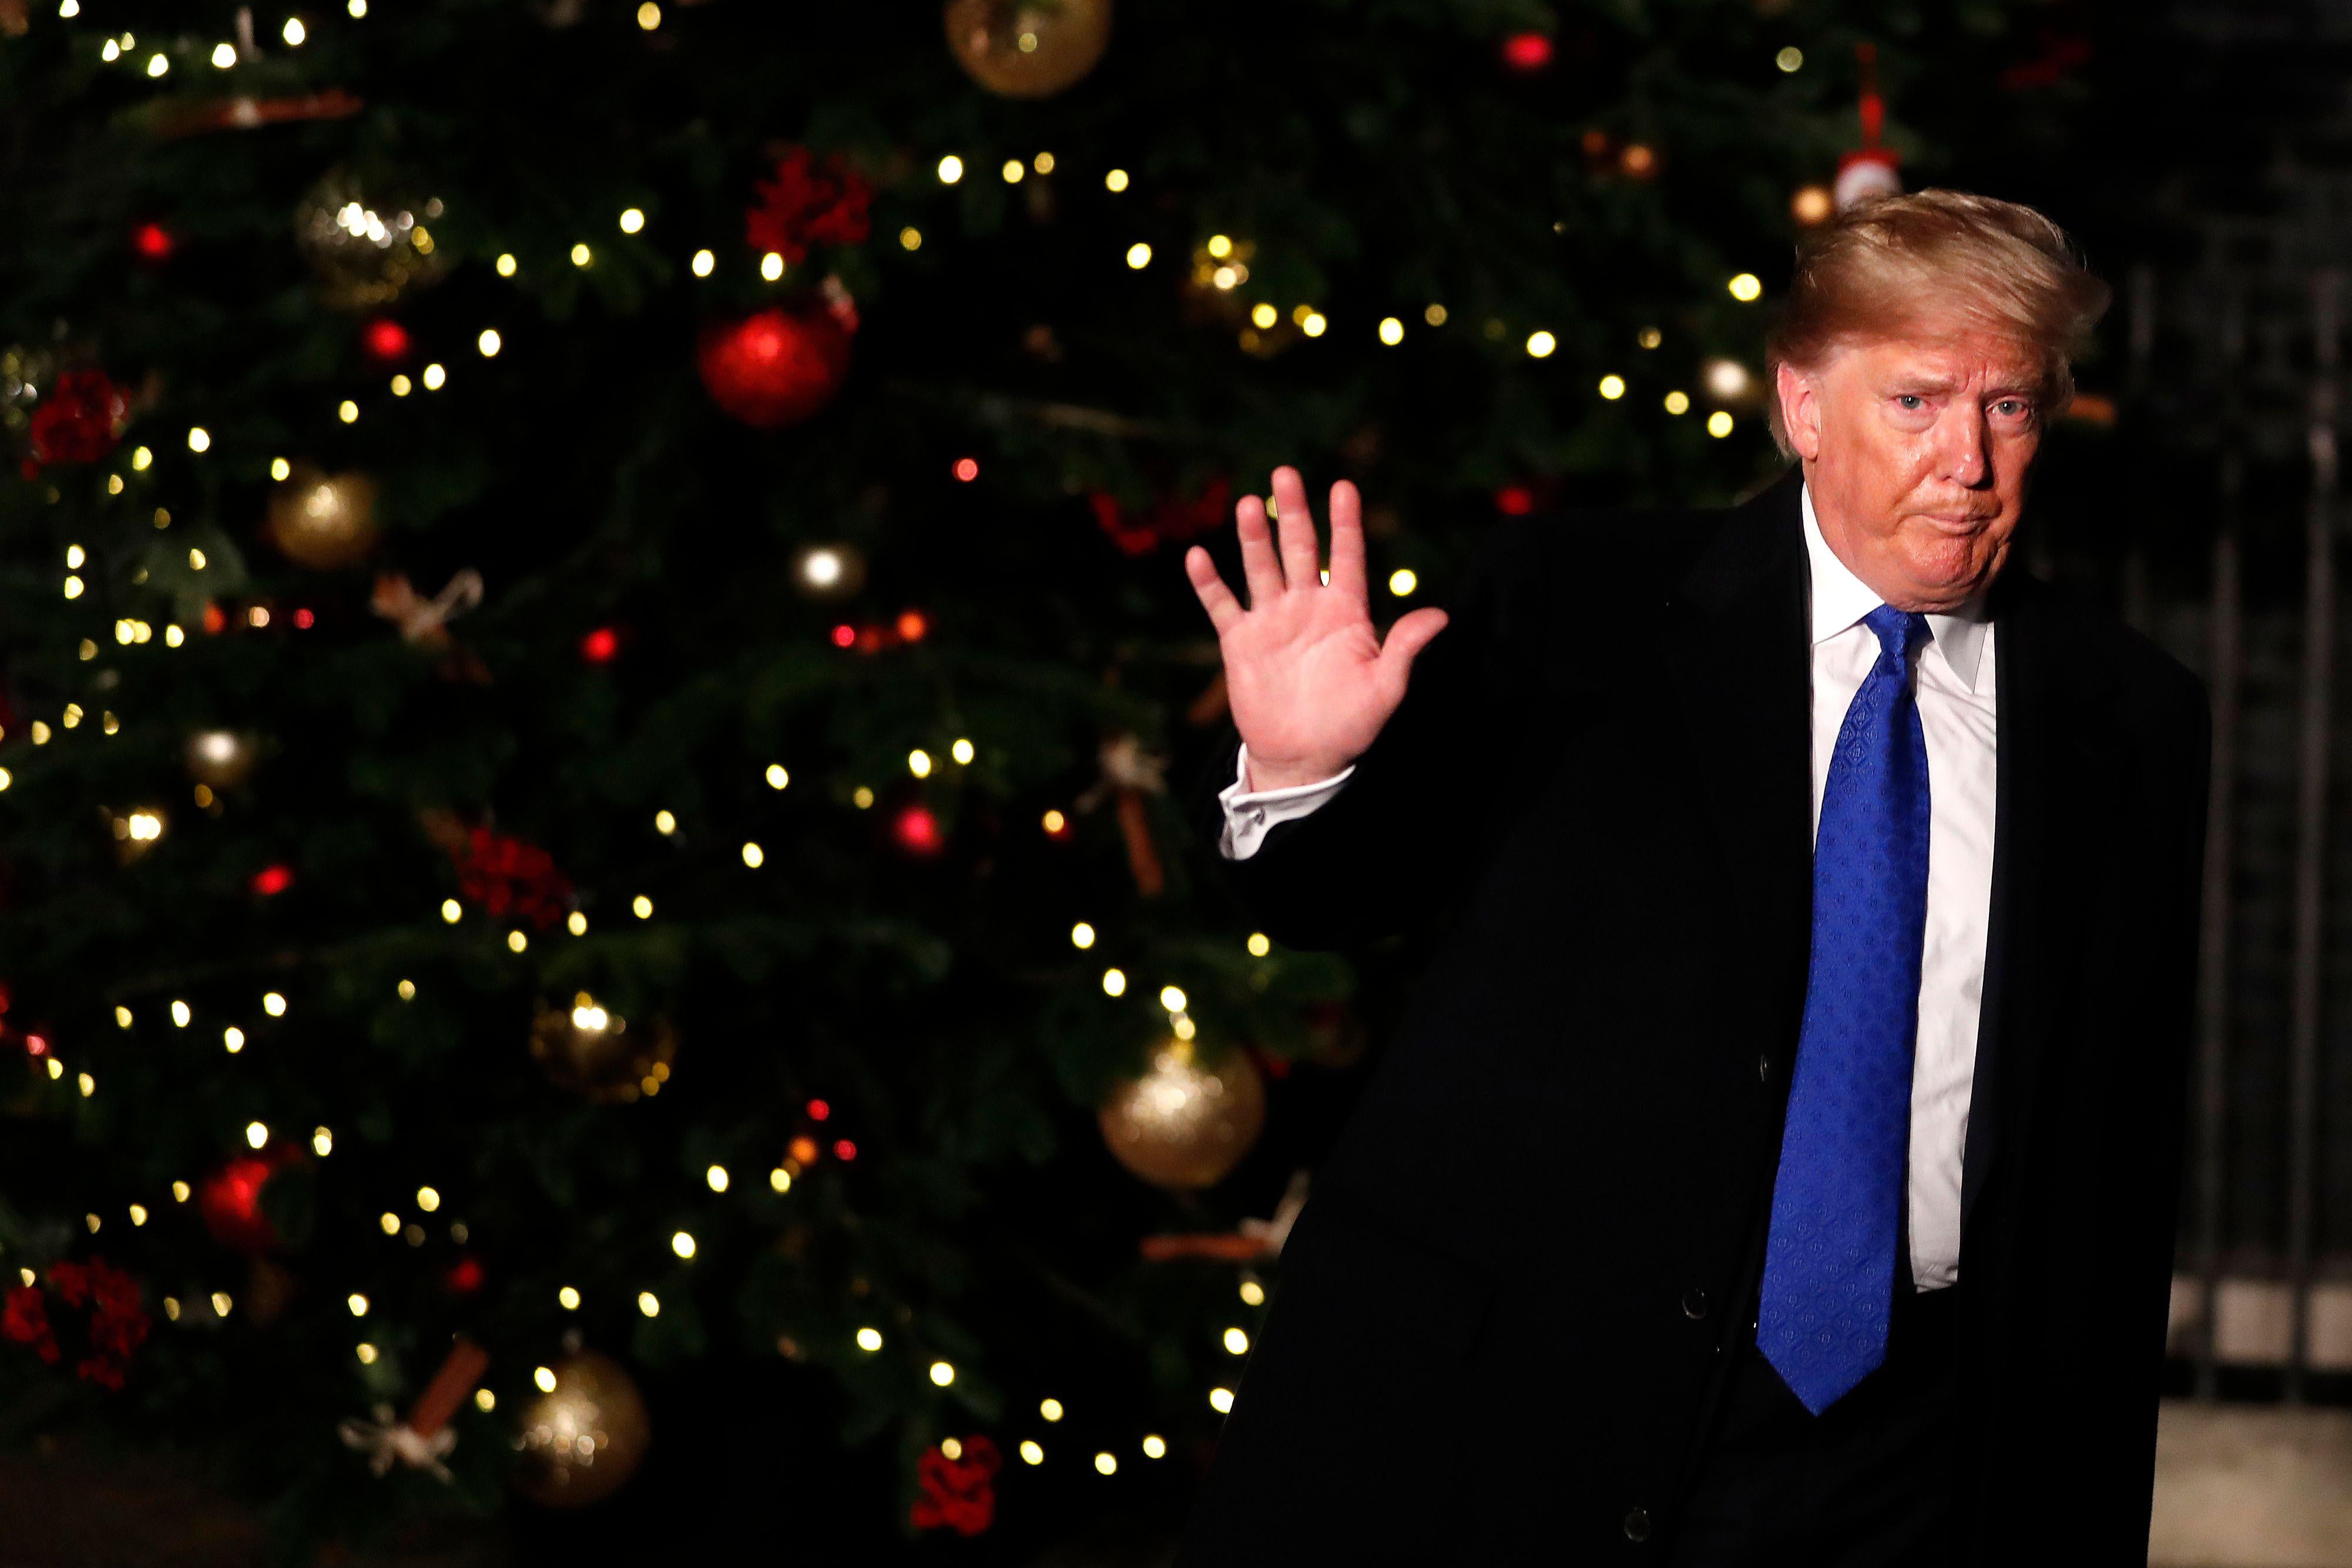 Trump is standing in front of a Christmas tree, waving goodbye, with a neutral or negative facial expression